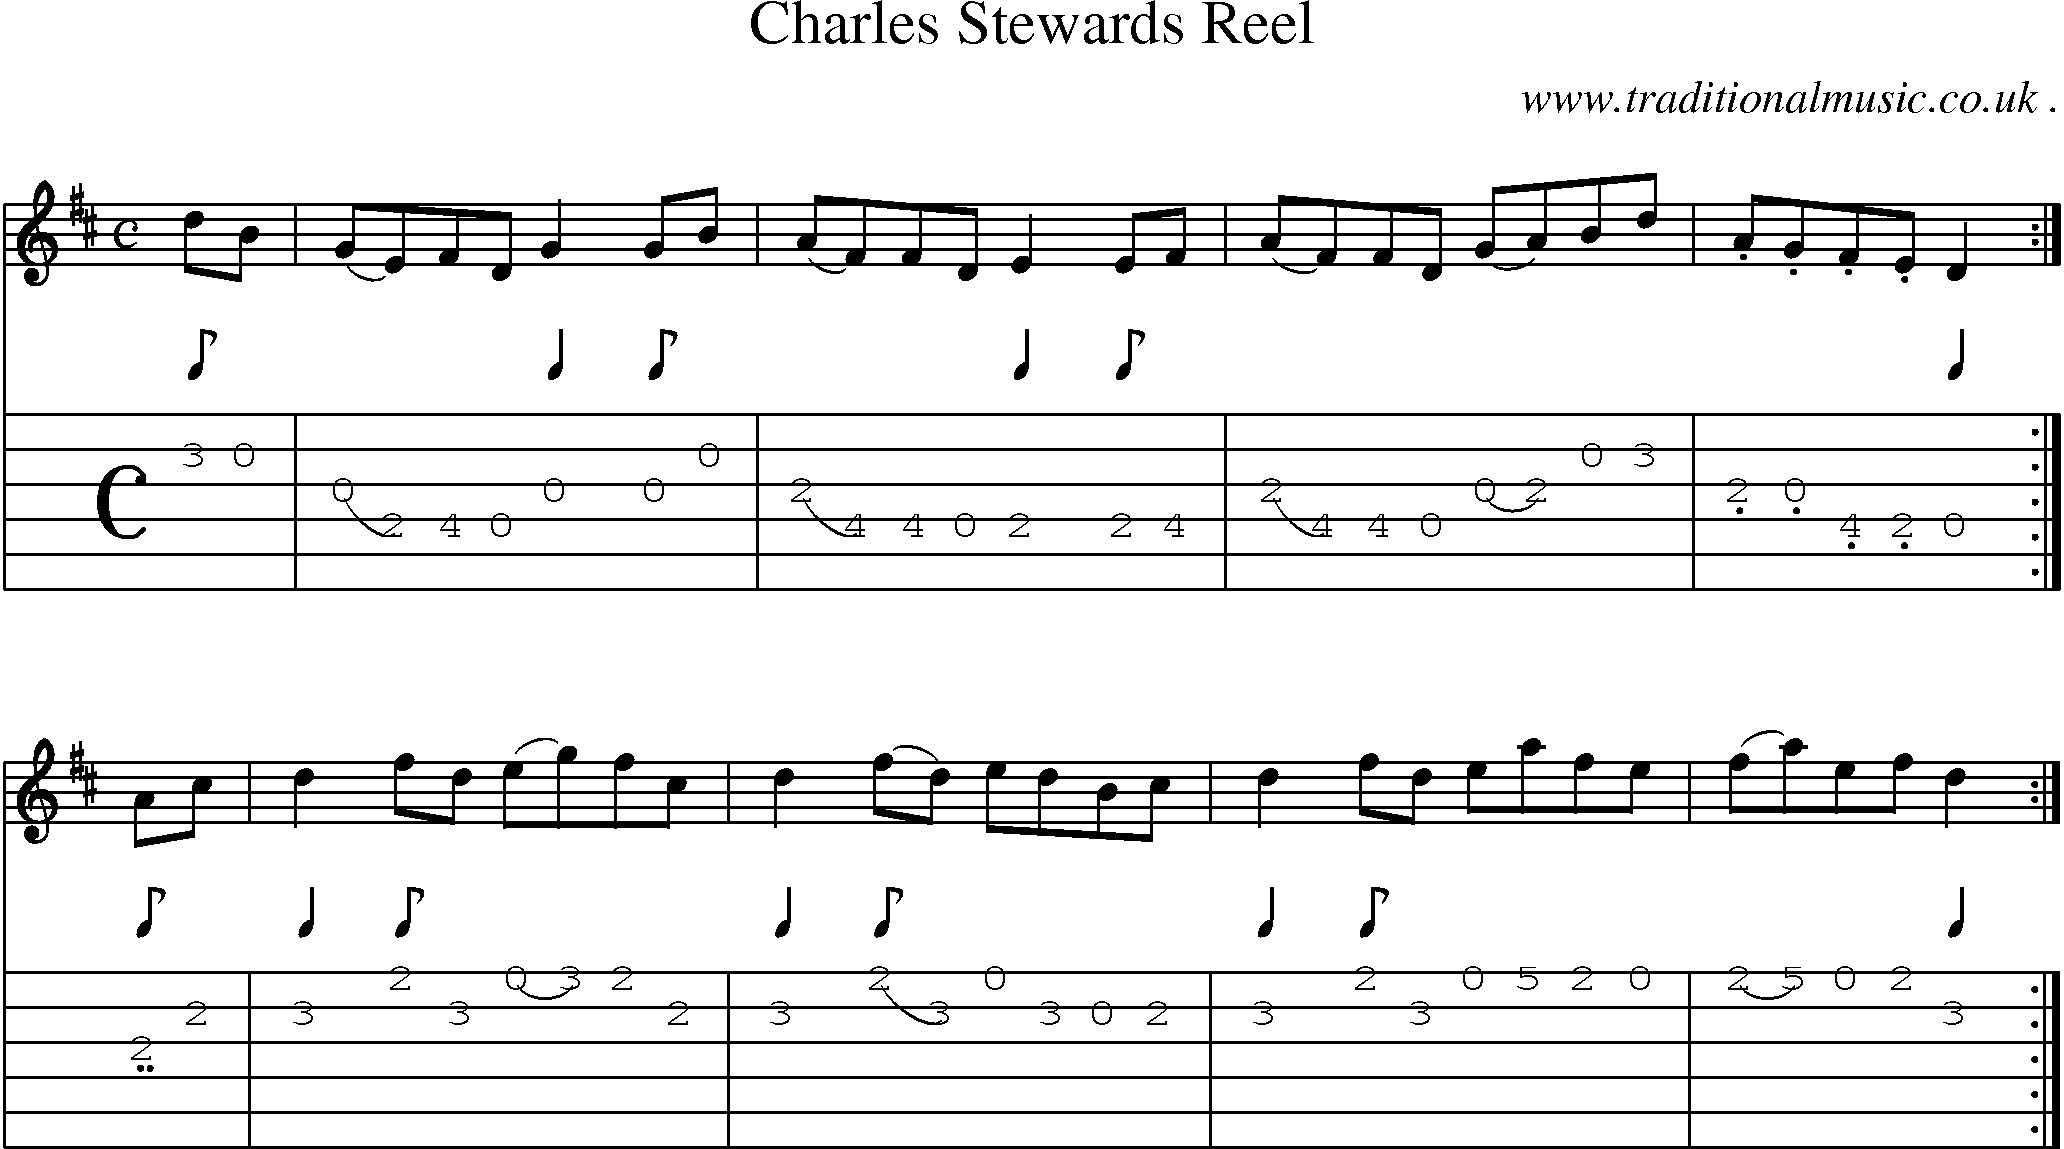 Sheet-Music and Guitar Tabs for Charles Stewards Reel